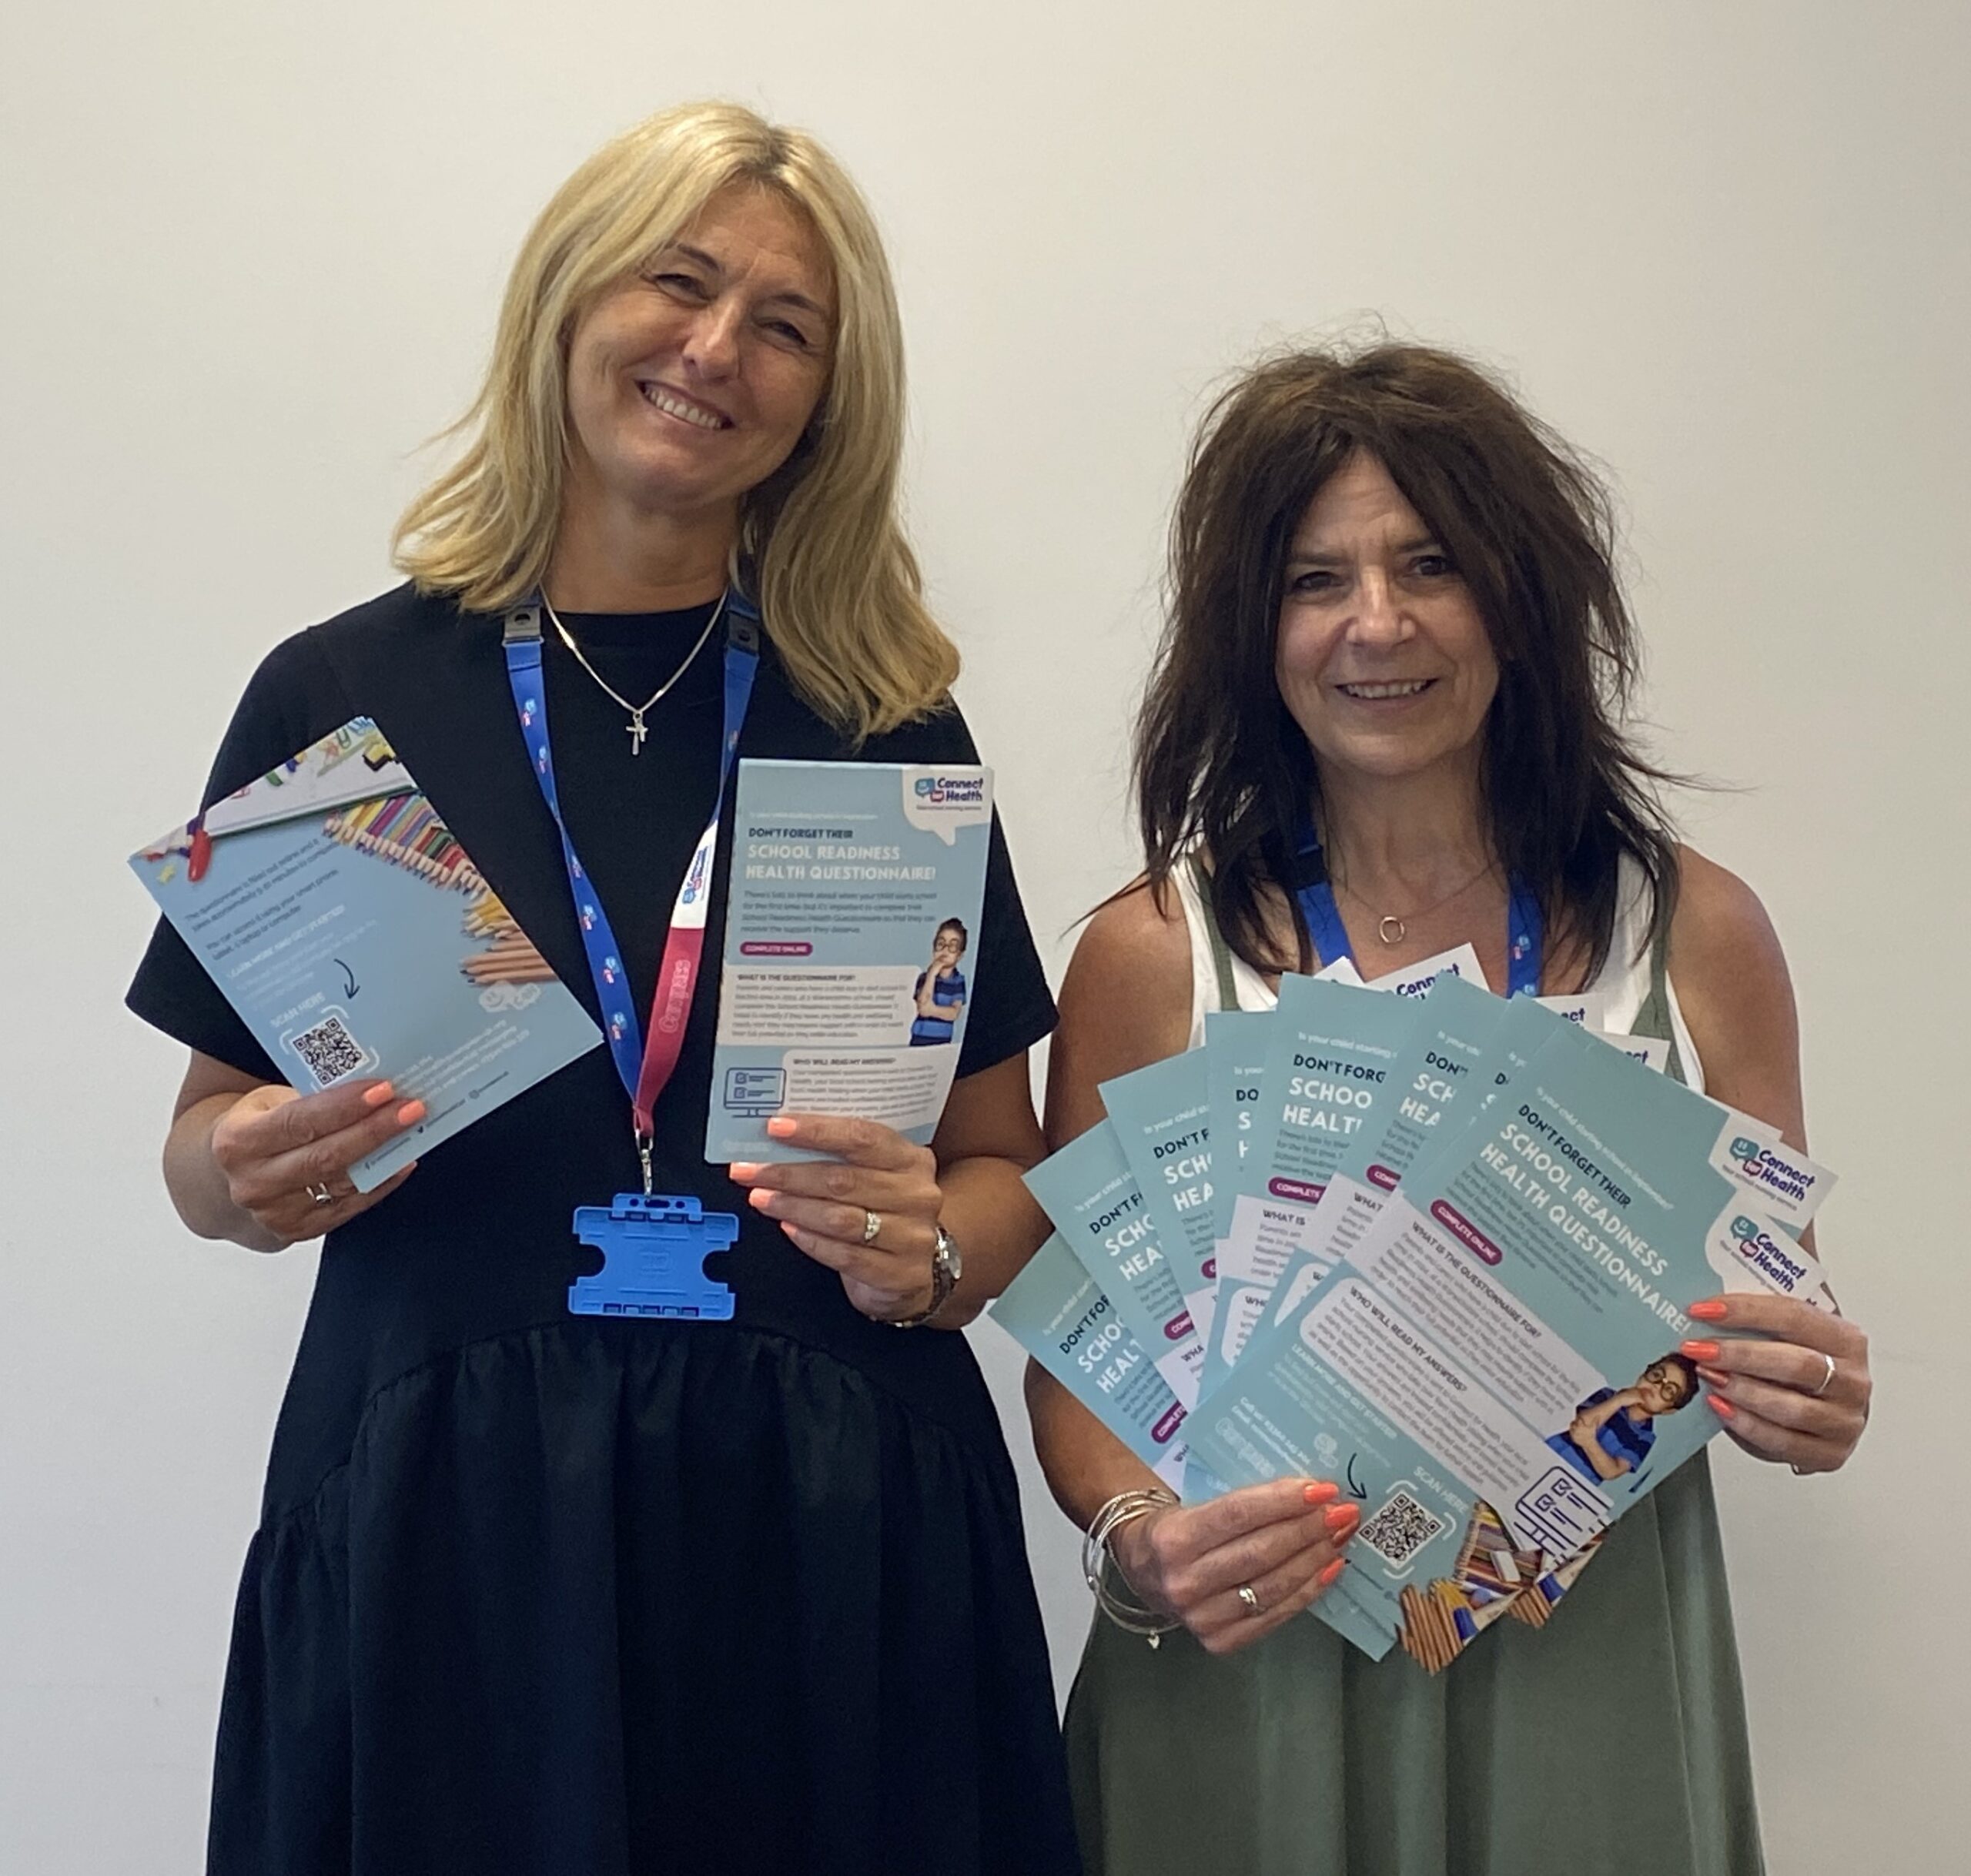 2 members of the connect for health team holding promotional flyers and posters.